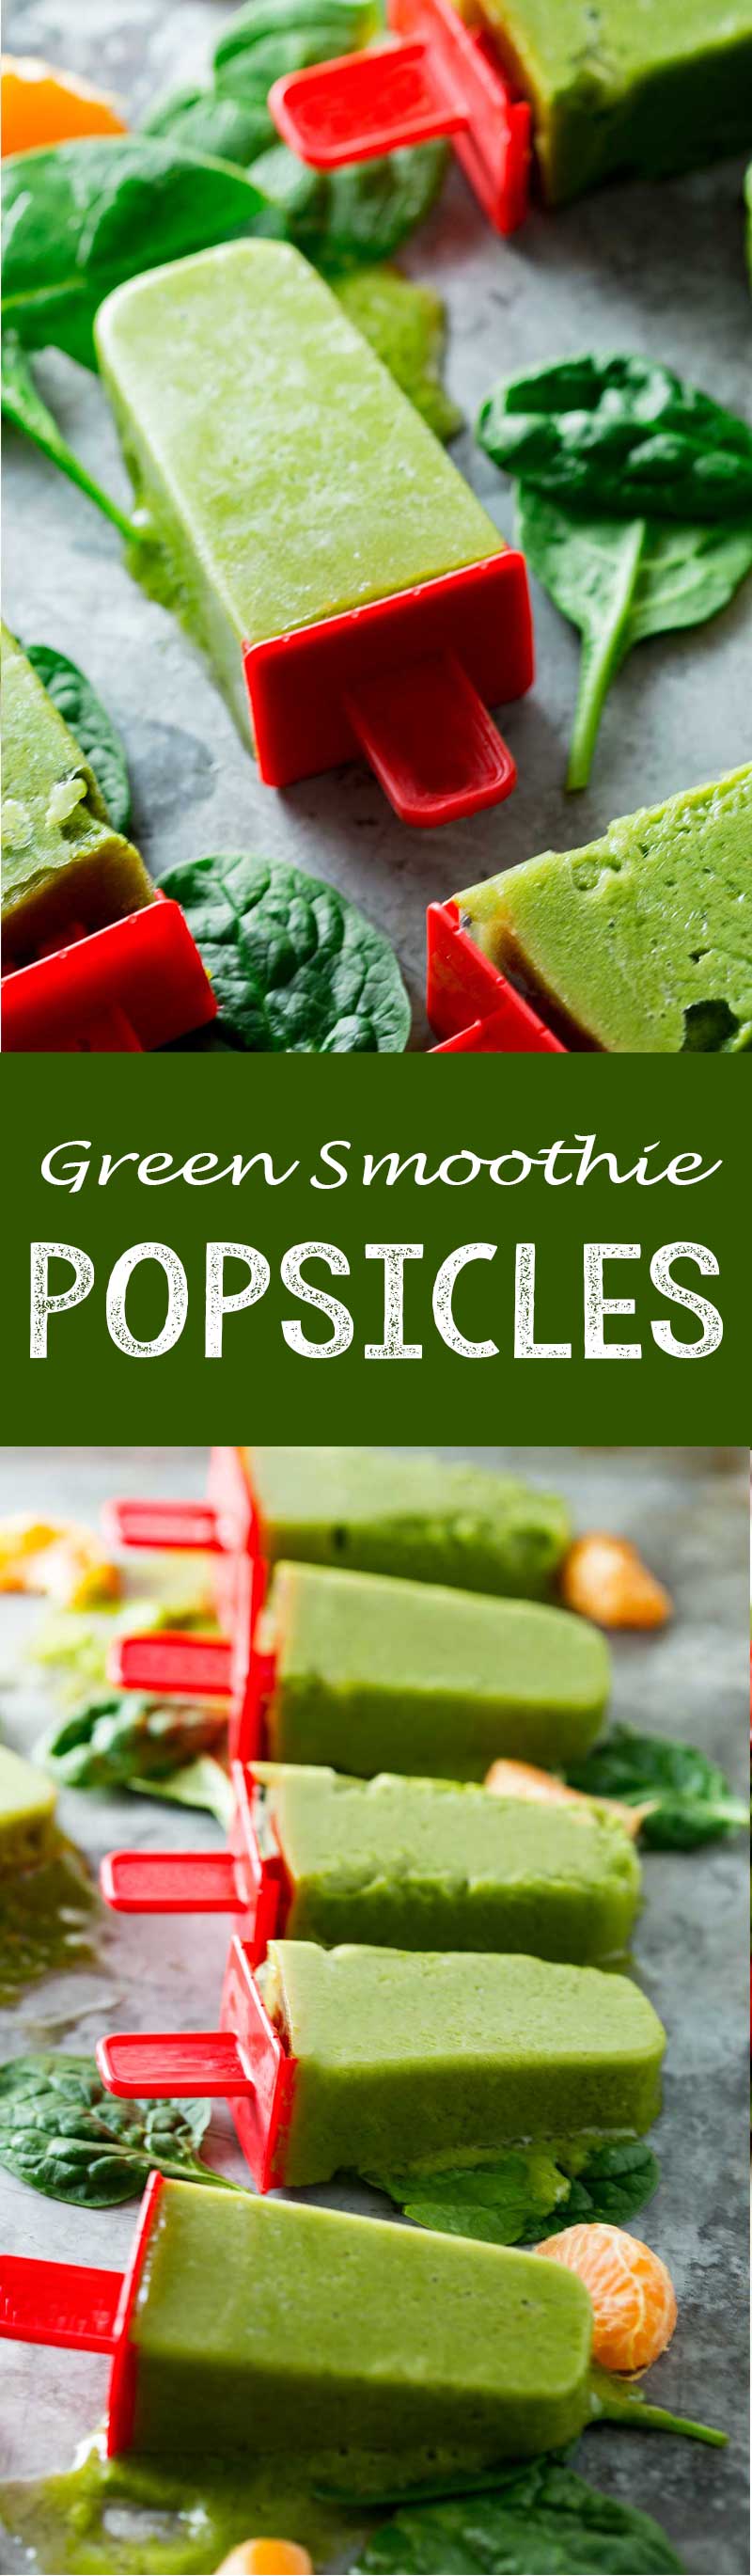 These are the yummiest, healthiest popsicles you will ever eat